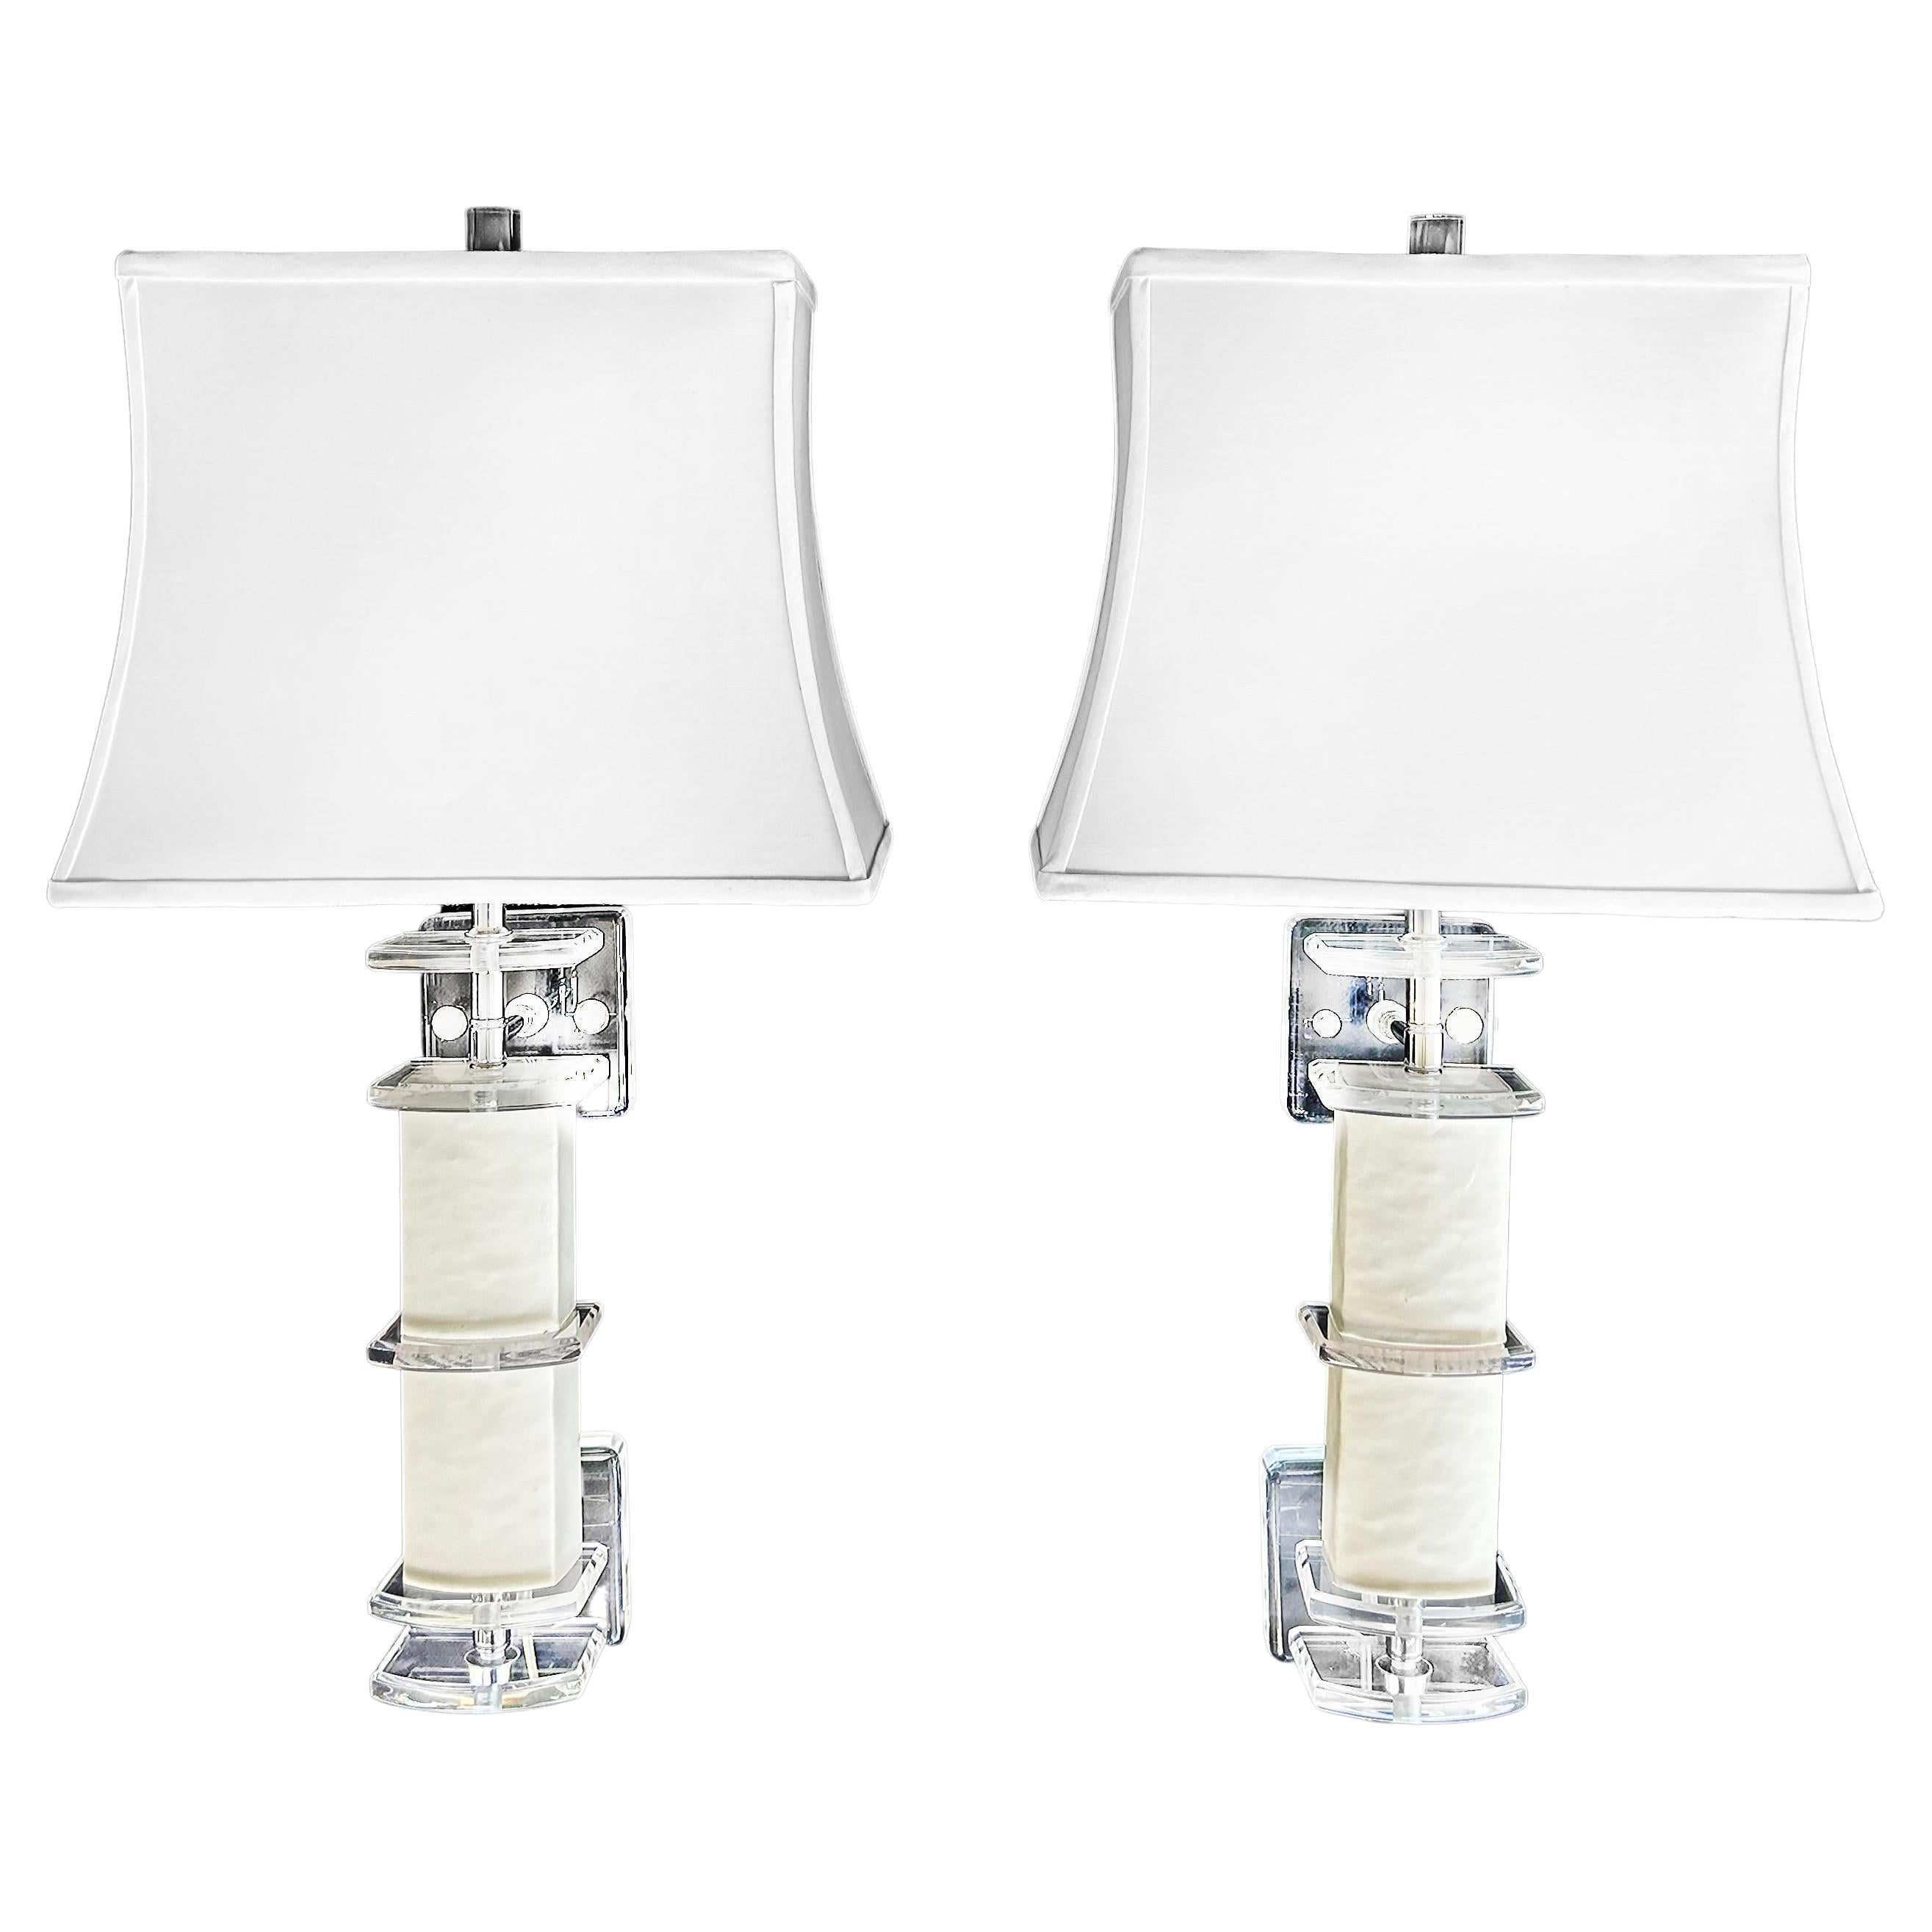 Vintage Lucite Wall Sconces with Faux Leather, Lucite Finials and Lampshades